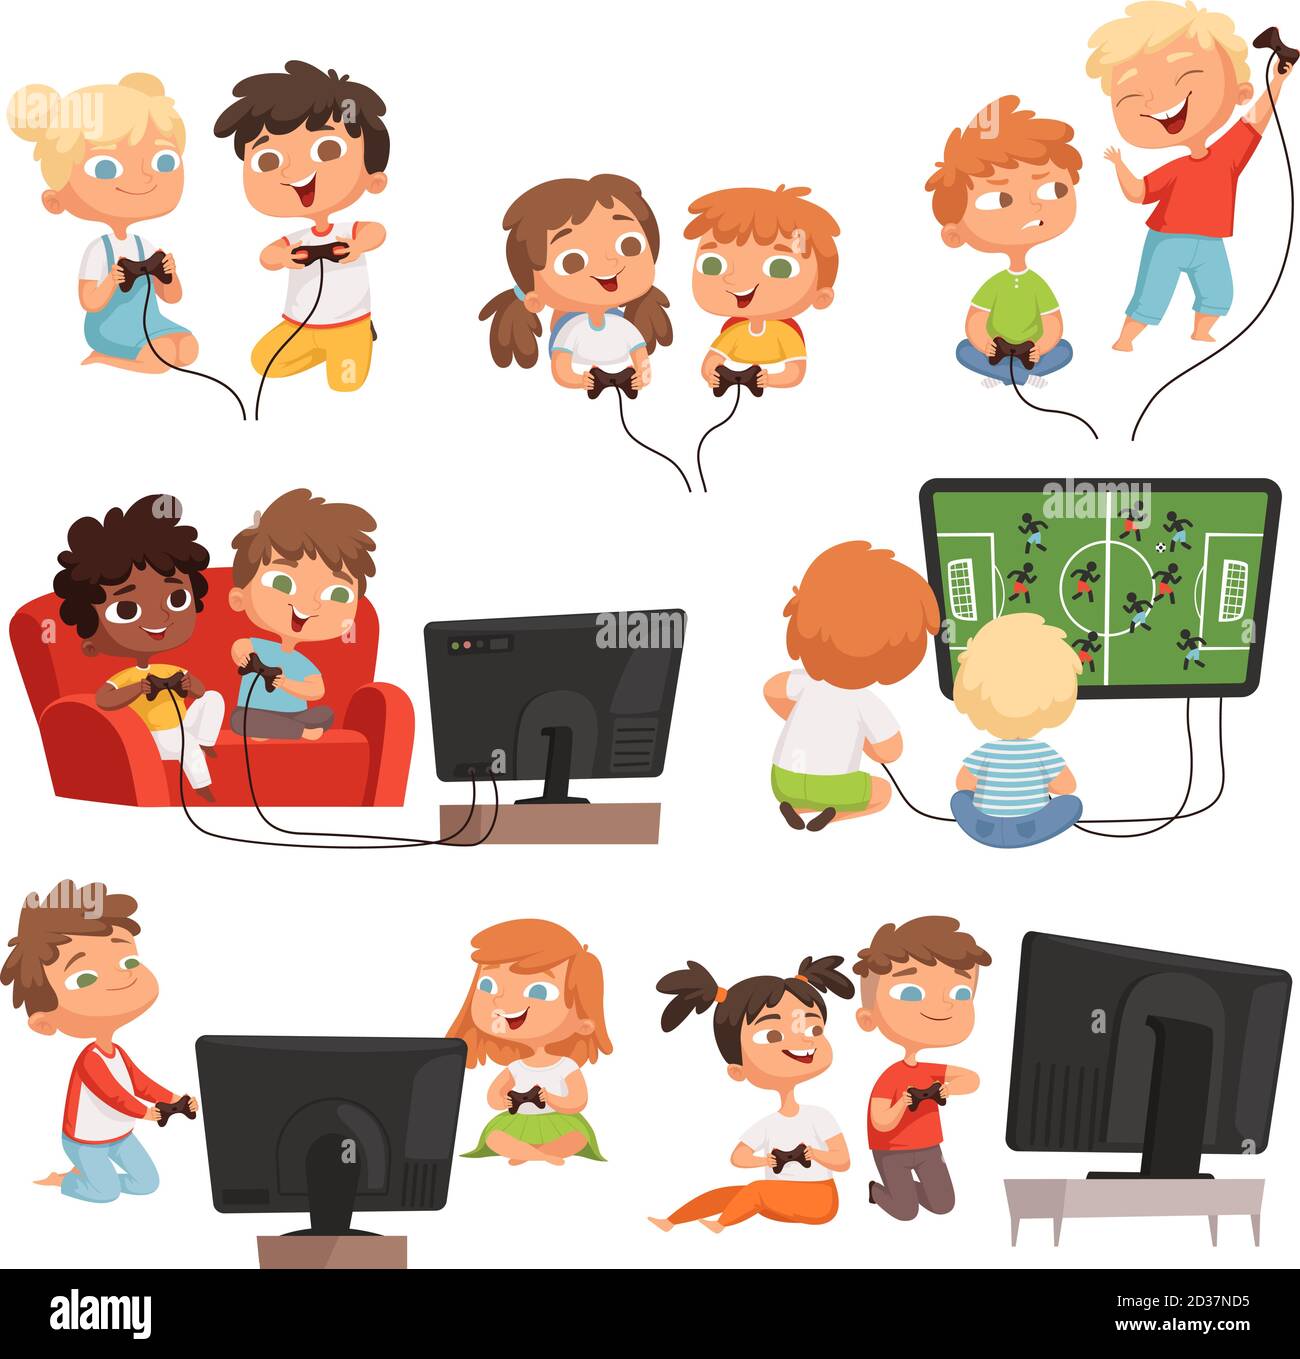 Video gaming. Peoples kids boys and girls console videogaming with controllers joystick gamepad funny vector childrens Stock Vector